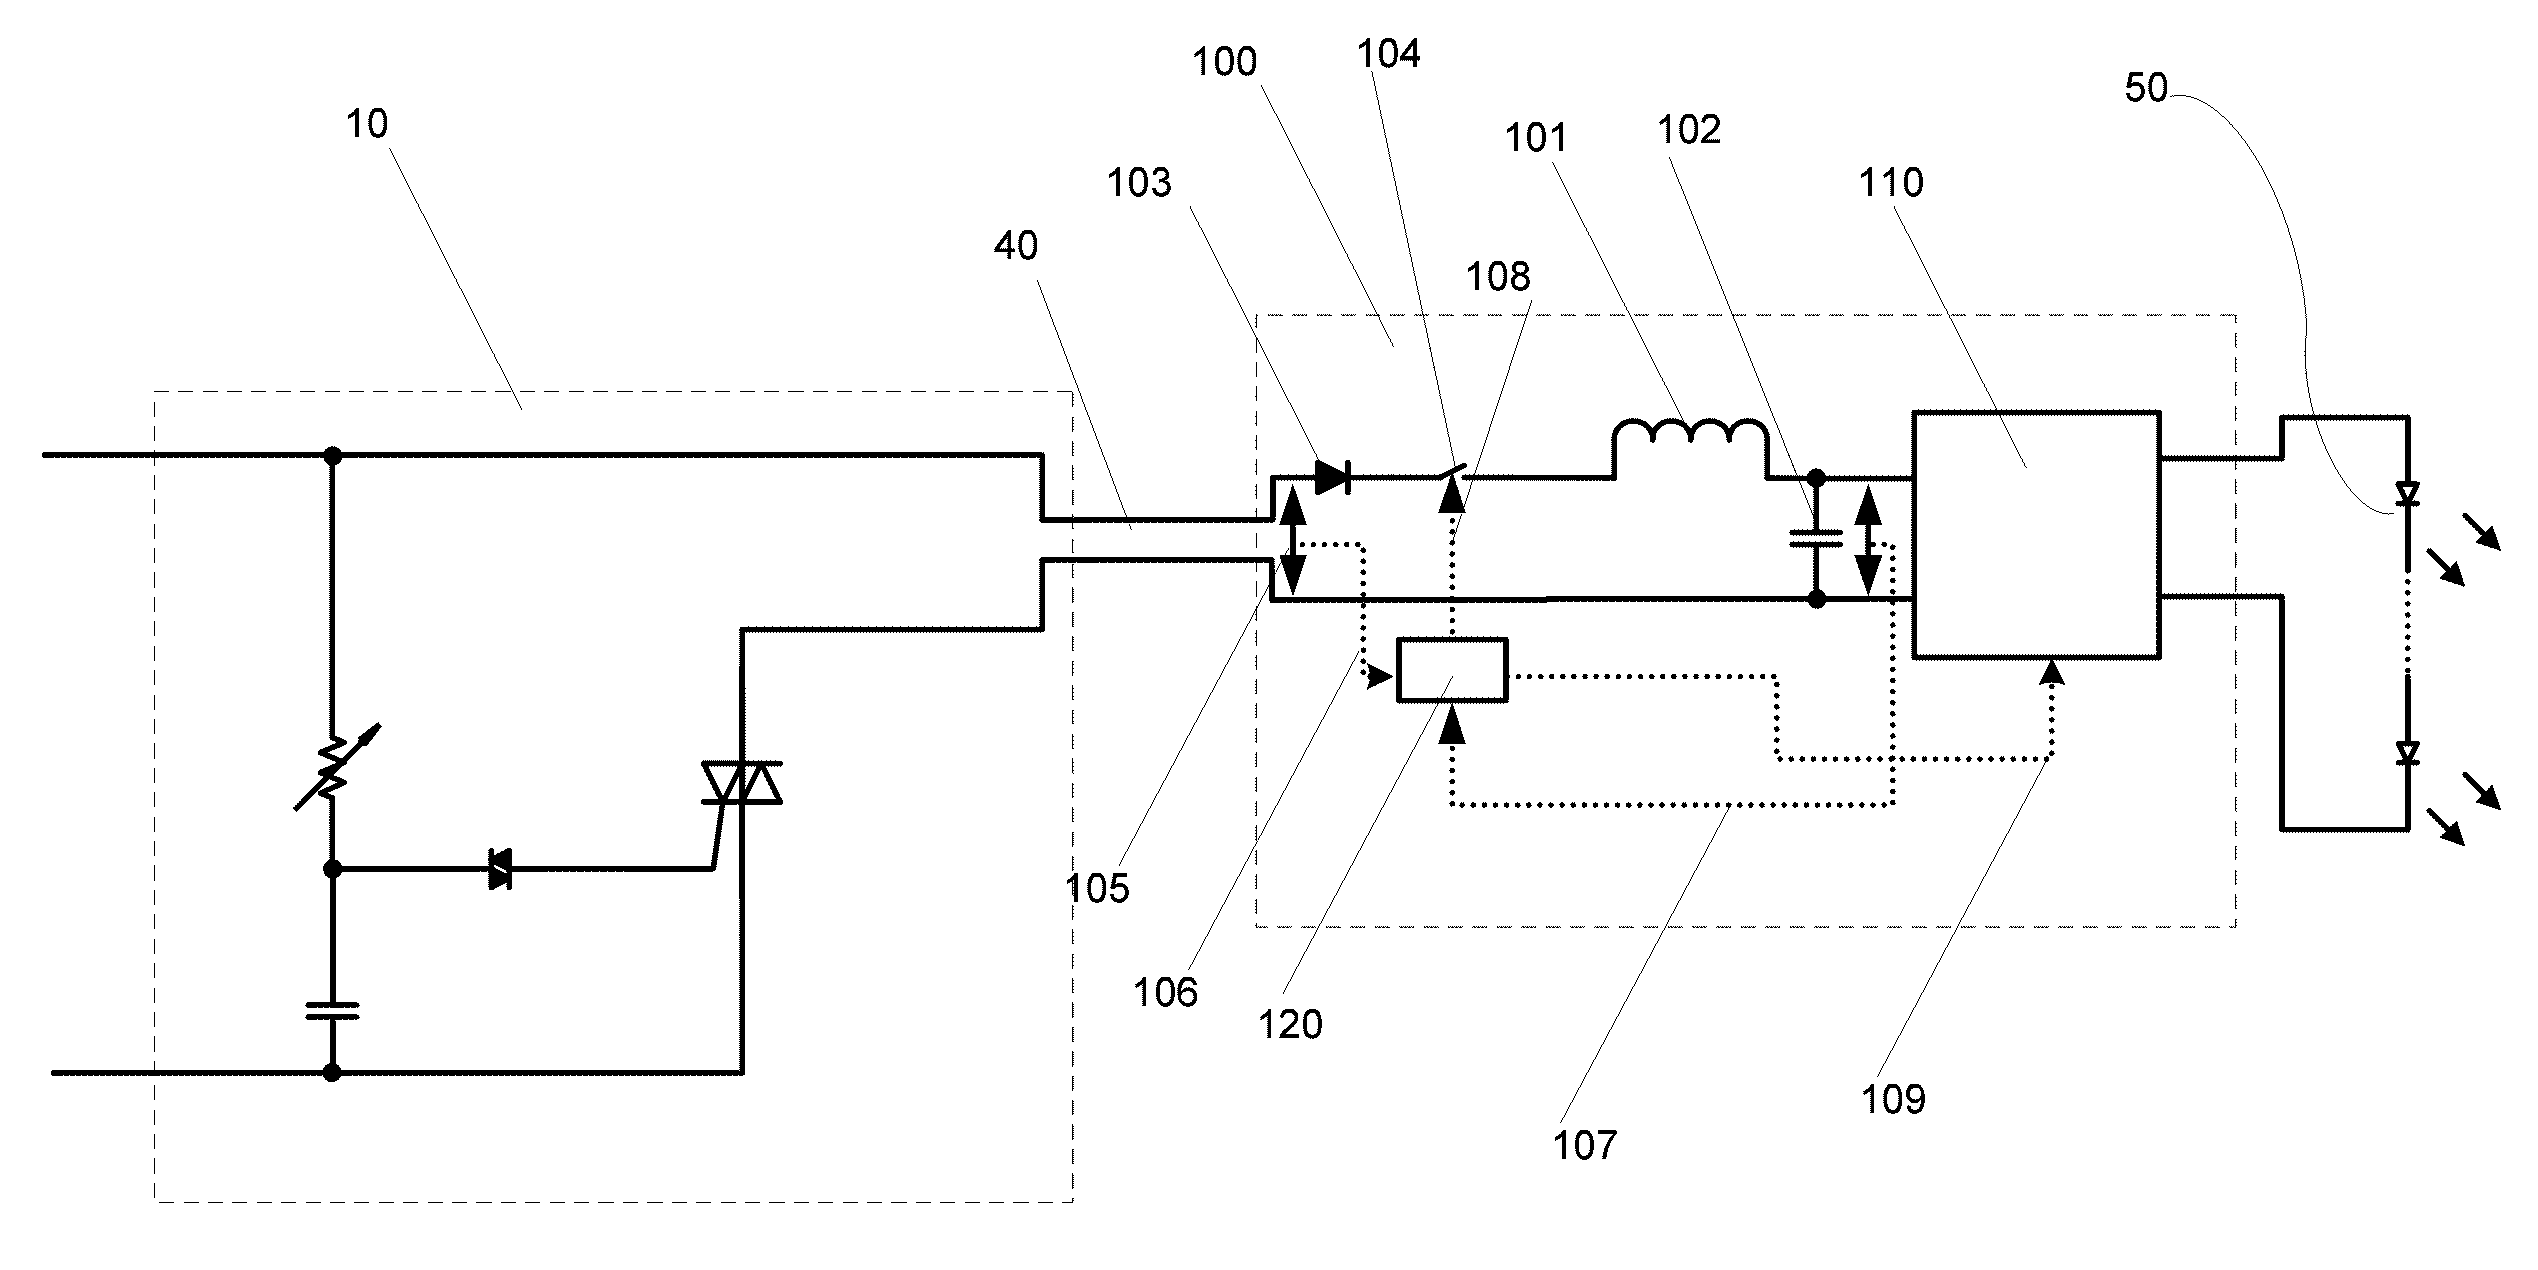 Method and Apparatus for Driving Low-Power Loads from AC Sources